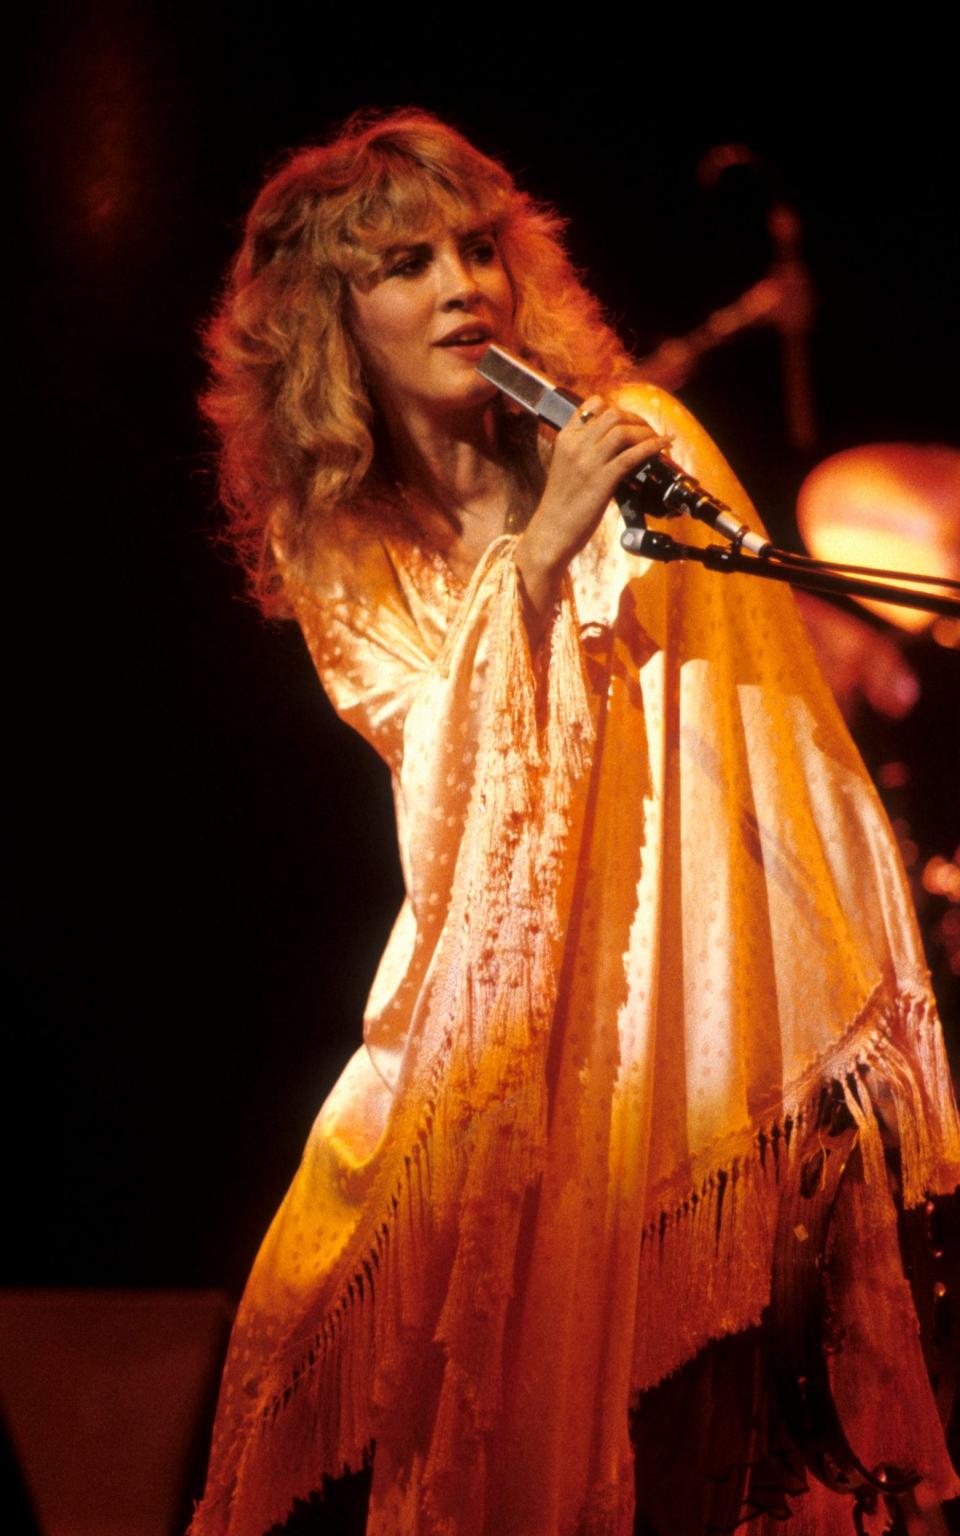  Stevie Nicks performing at the Oakland Coliseum in Oakland, California on her first solo tour on December 3. 1981. - Getty